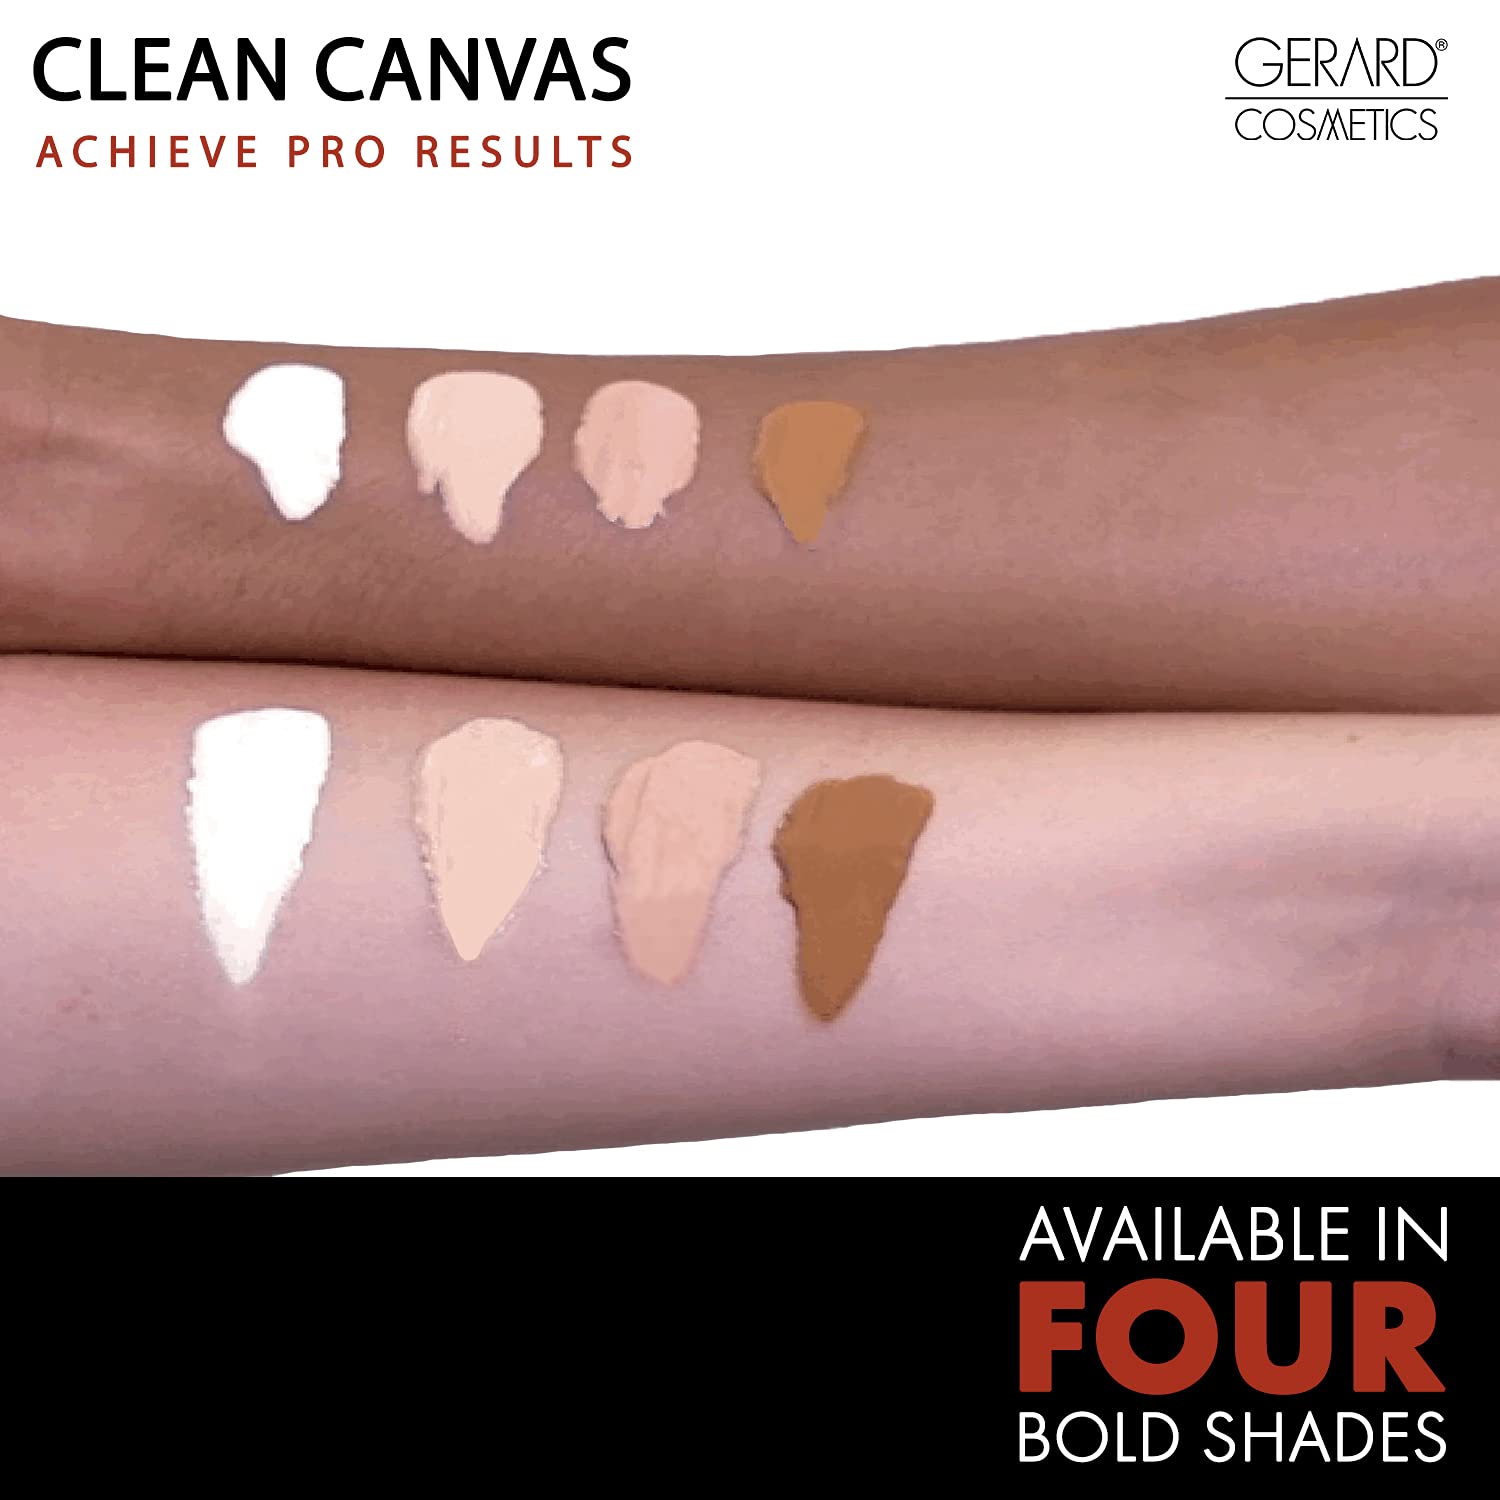 Gerard Cosmetics Clean Canvas Eye Concealer and Base - Smoothens Under Eye and Covers Blemishes - Extends Duration of Eyeshadow Wear - Evens Complexion - Keeps Makeup Color - Cocoa - 0.14 oz